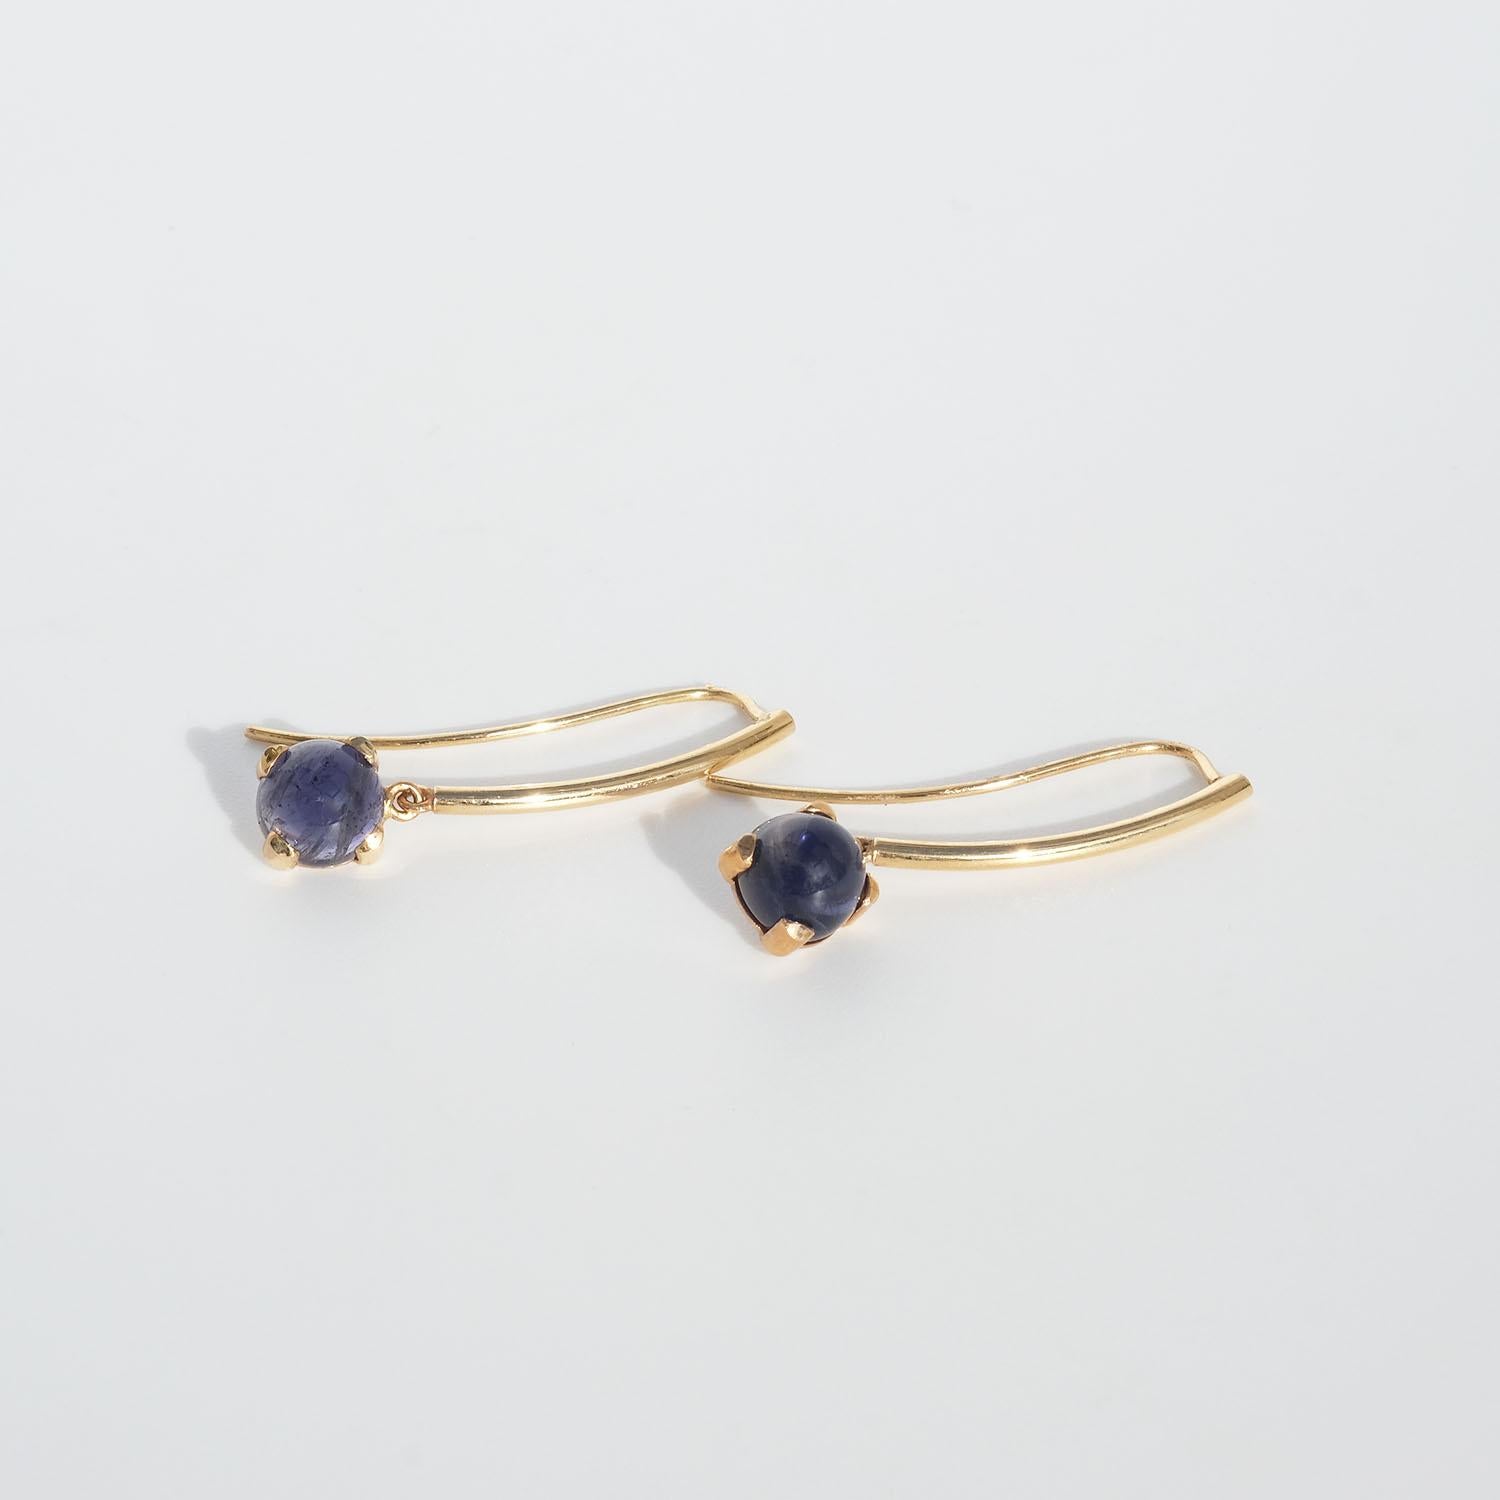 These 18 karat drop earrings are adorned with cabochon cut iolite stones. Each iolite stone has a beautiful violet colour which plays perfectly with the golden colour of the bars. To keep the earrings in place hooks are used. 

The earrings have a